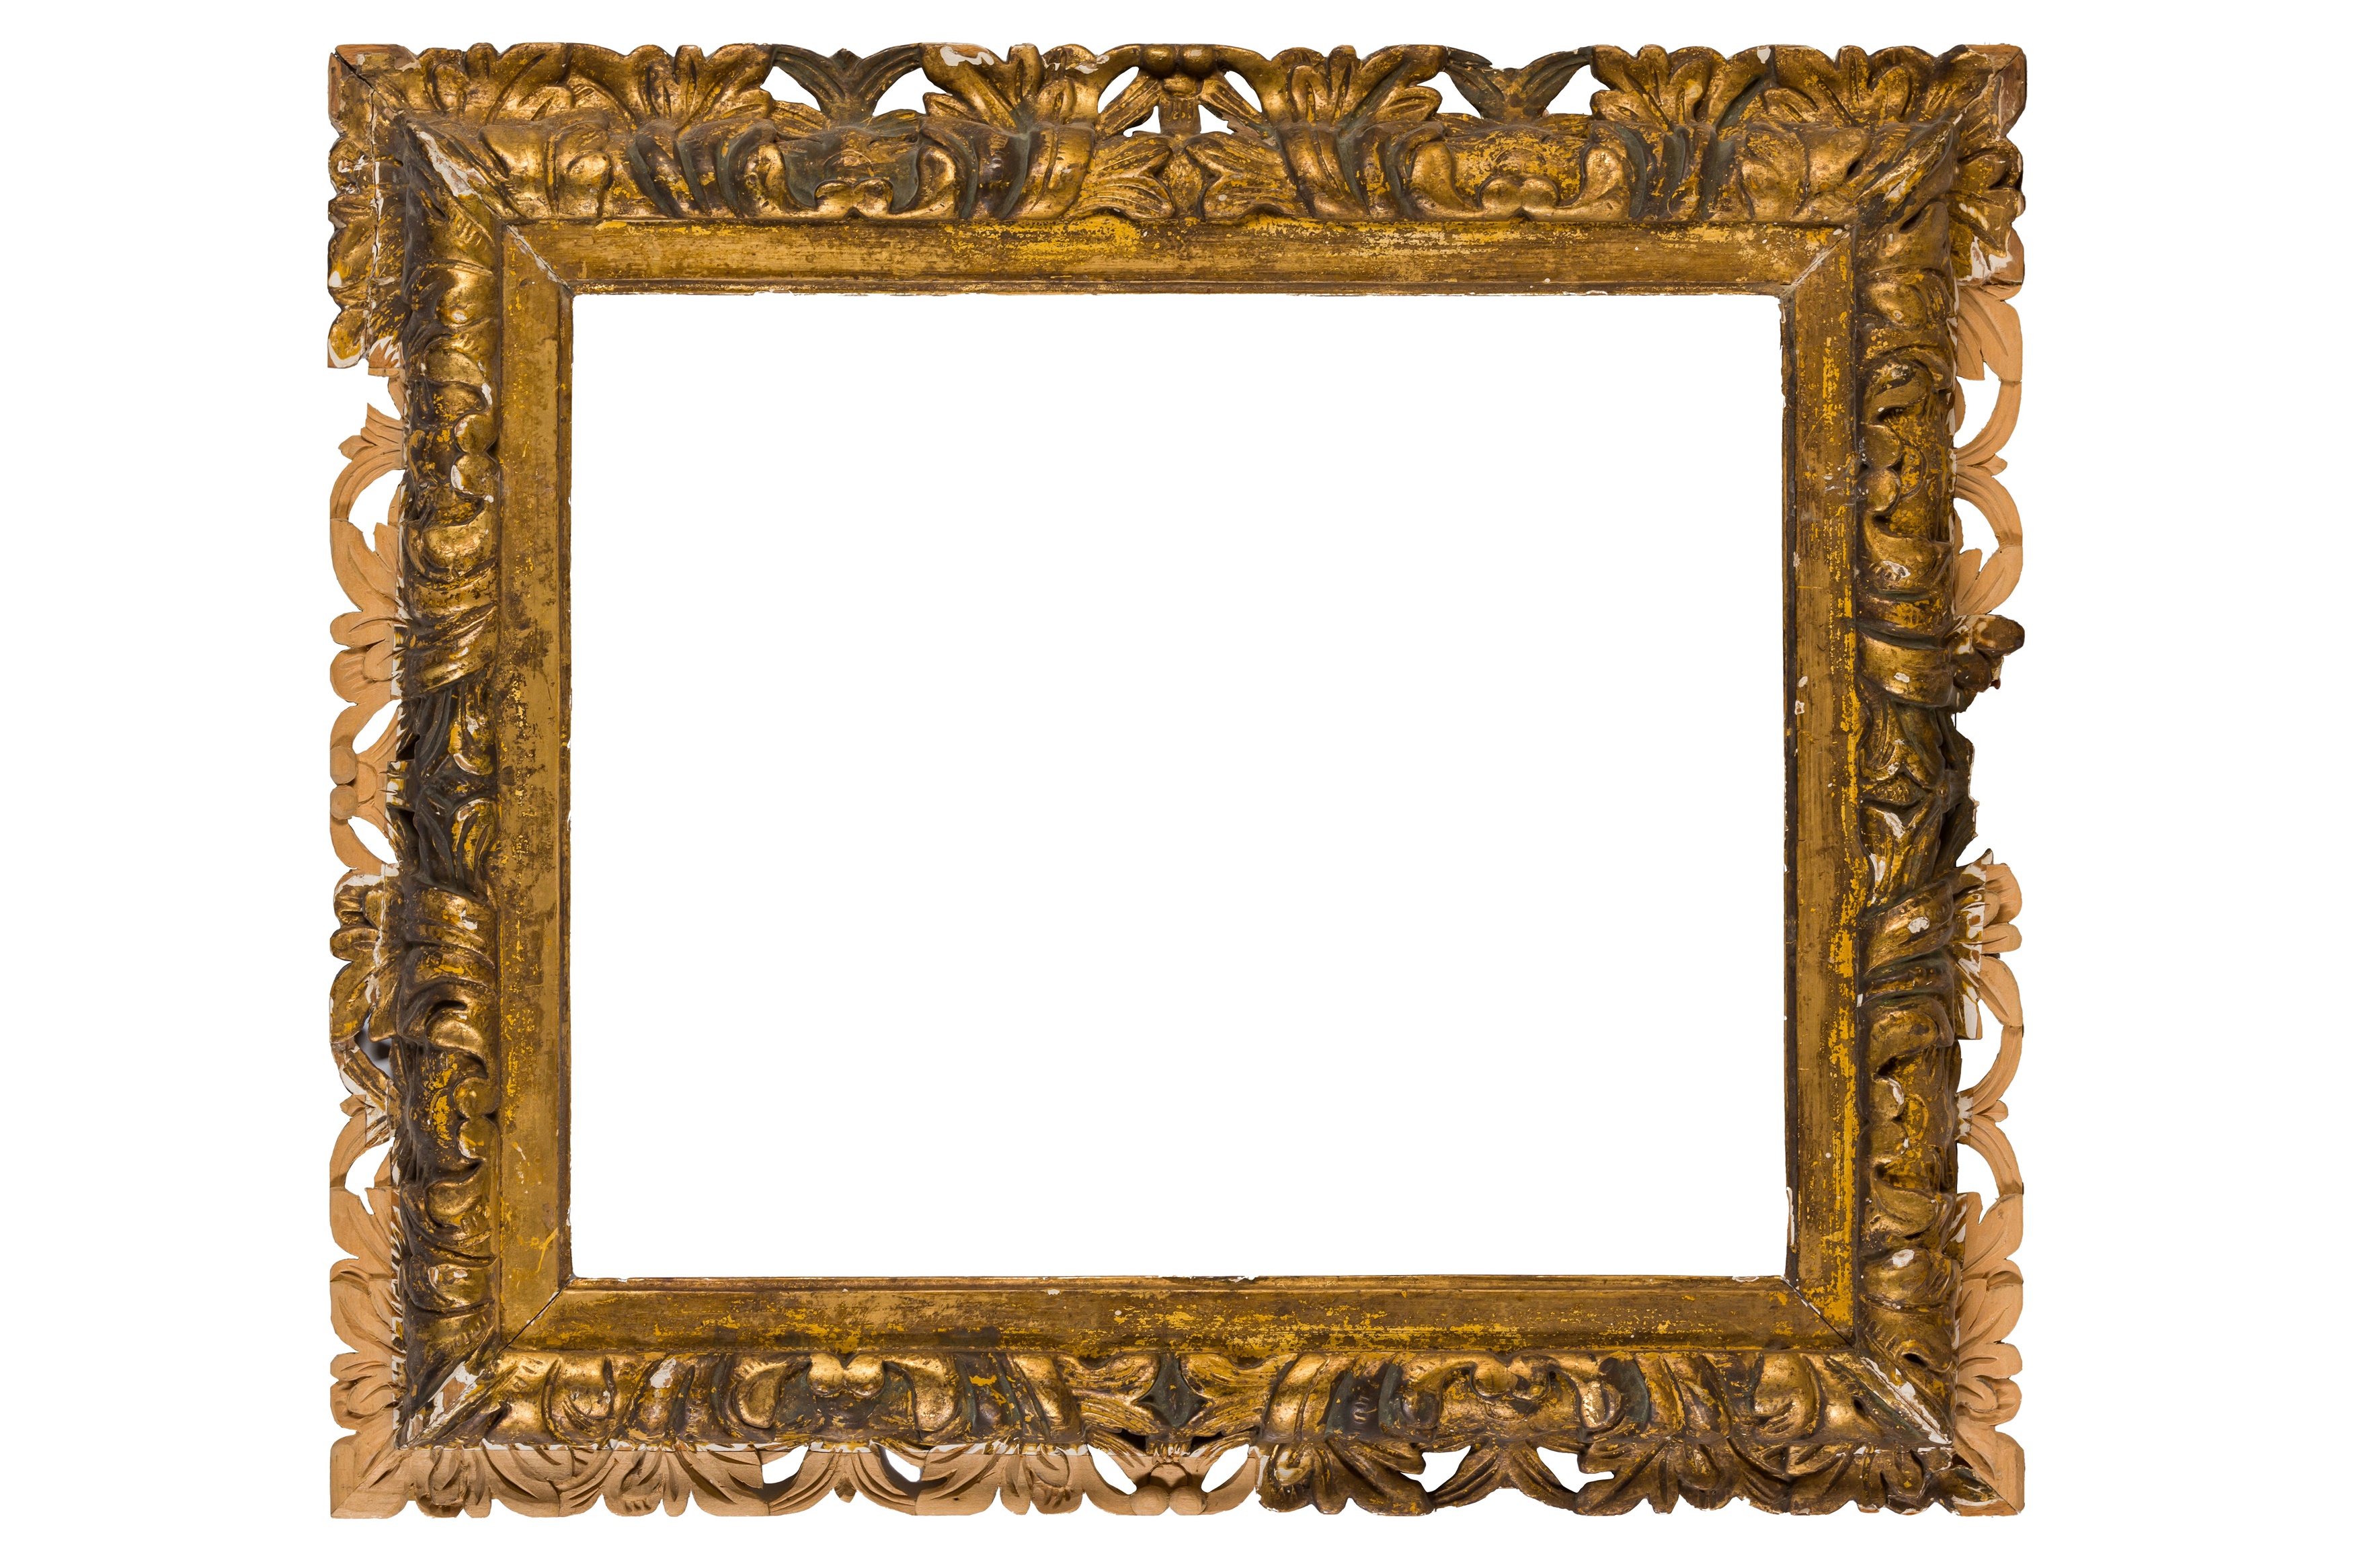 A FLORENTINE 18TH CENTURY CARVED, PIERCED AND GILDED FRAME